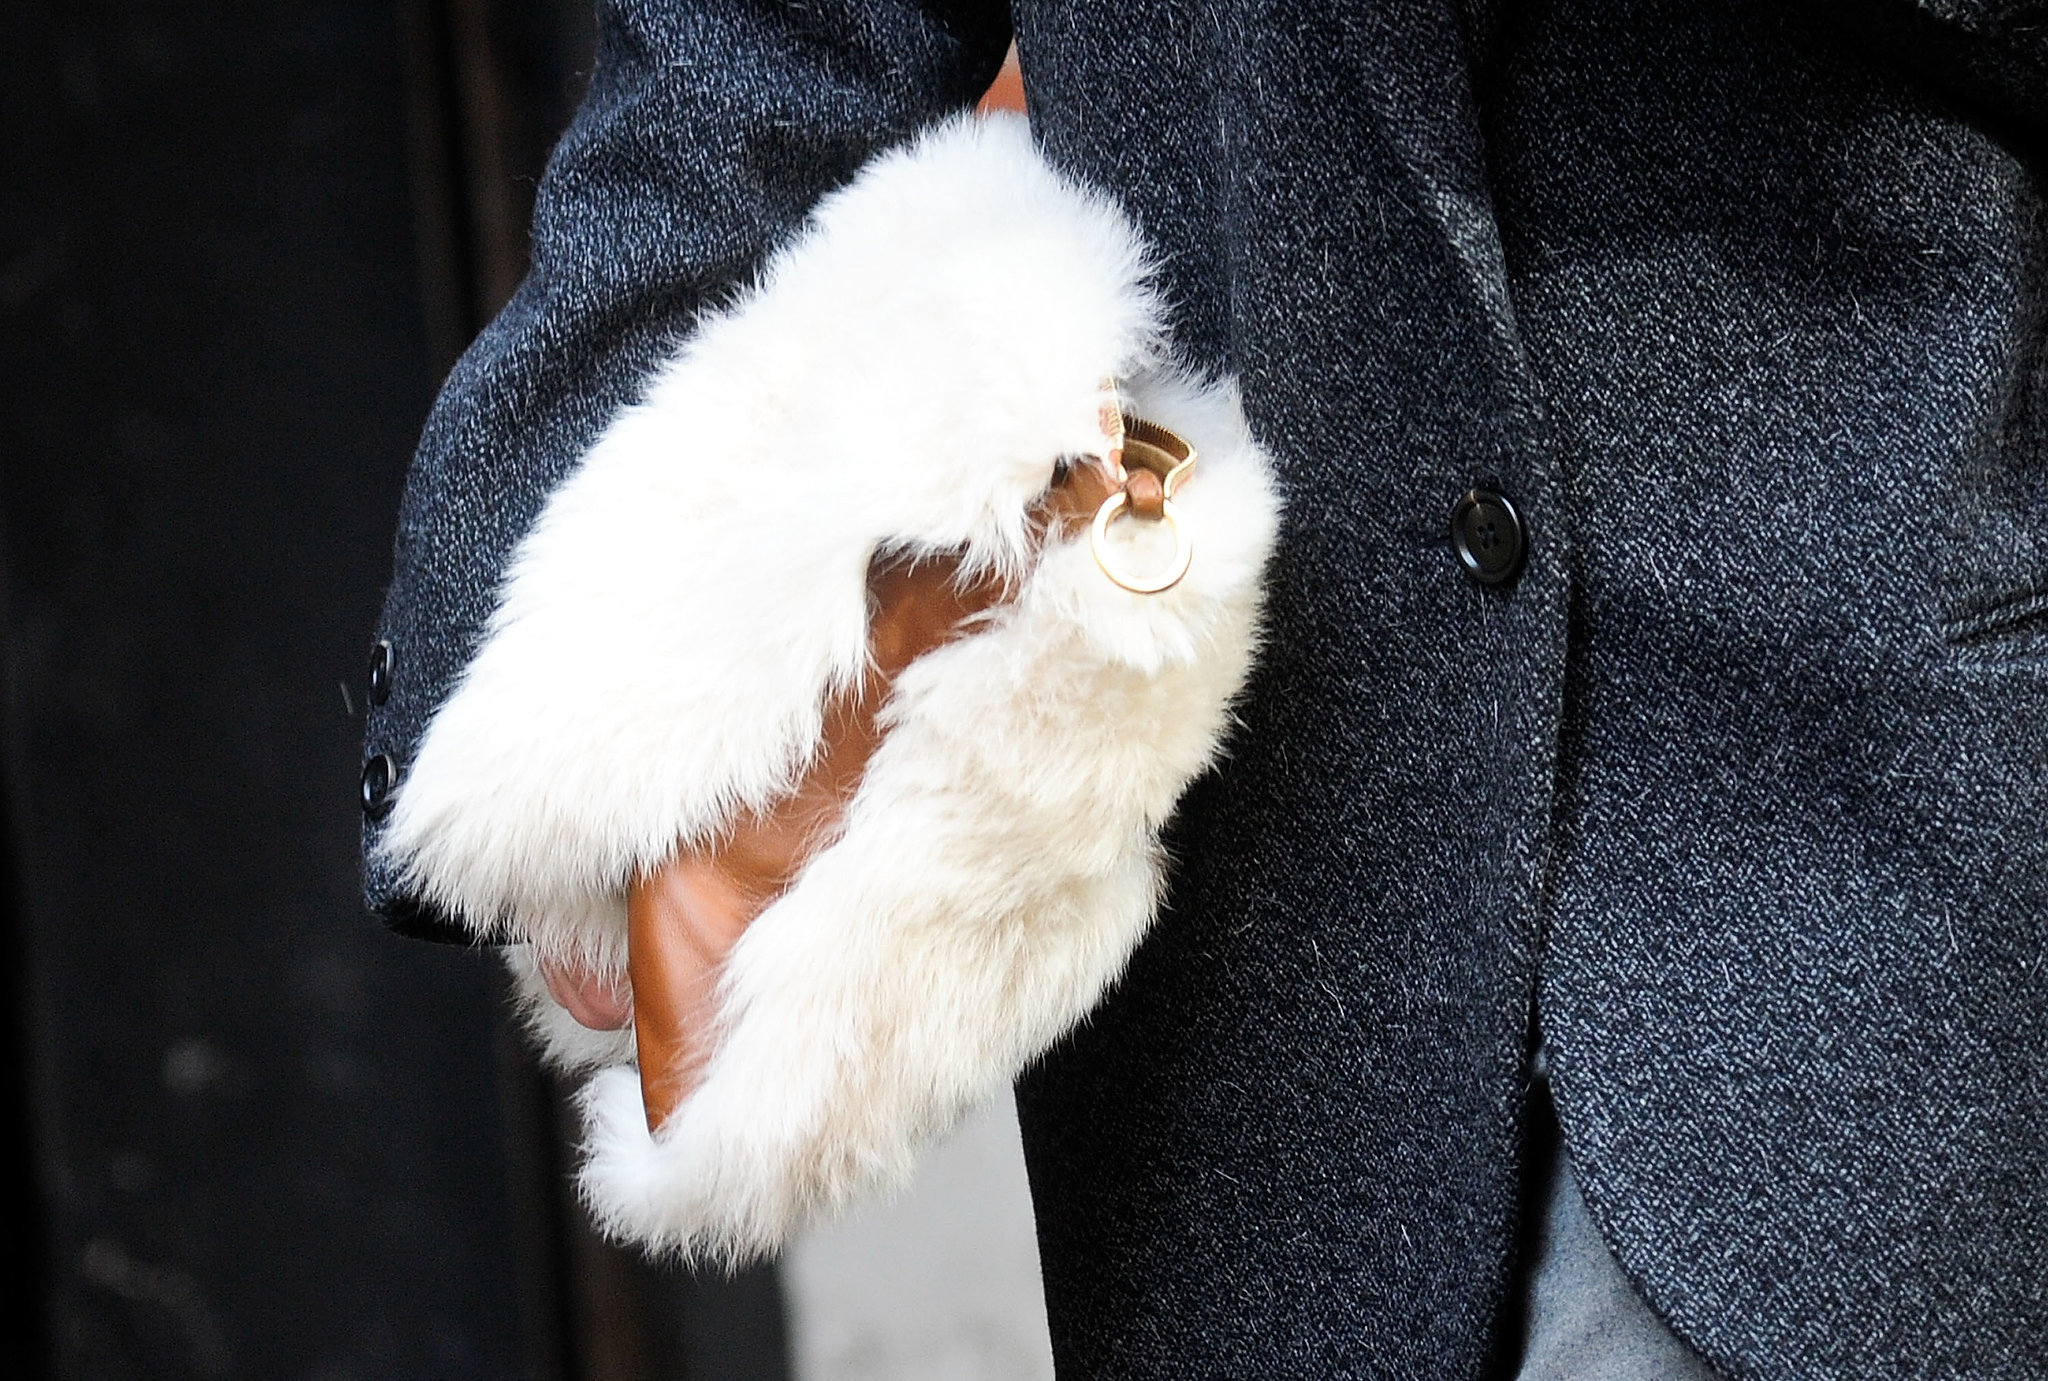 We're crushing on this plush clutch.
